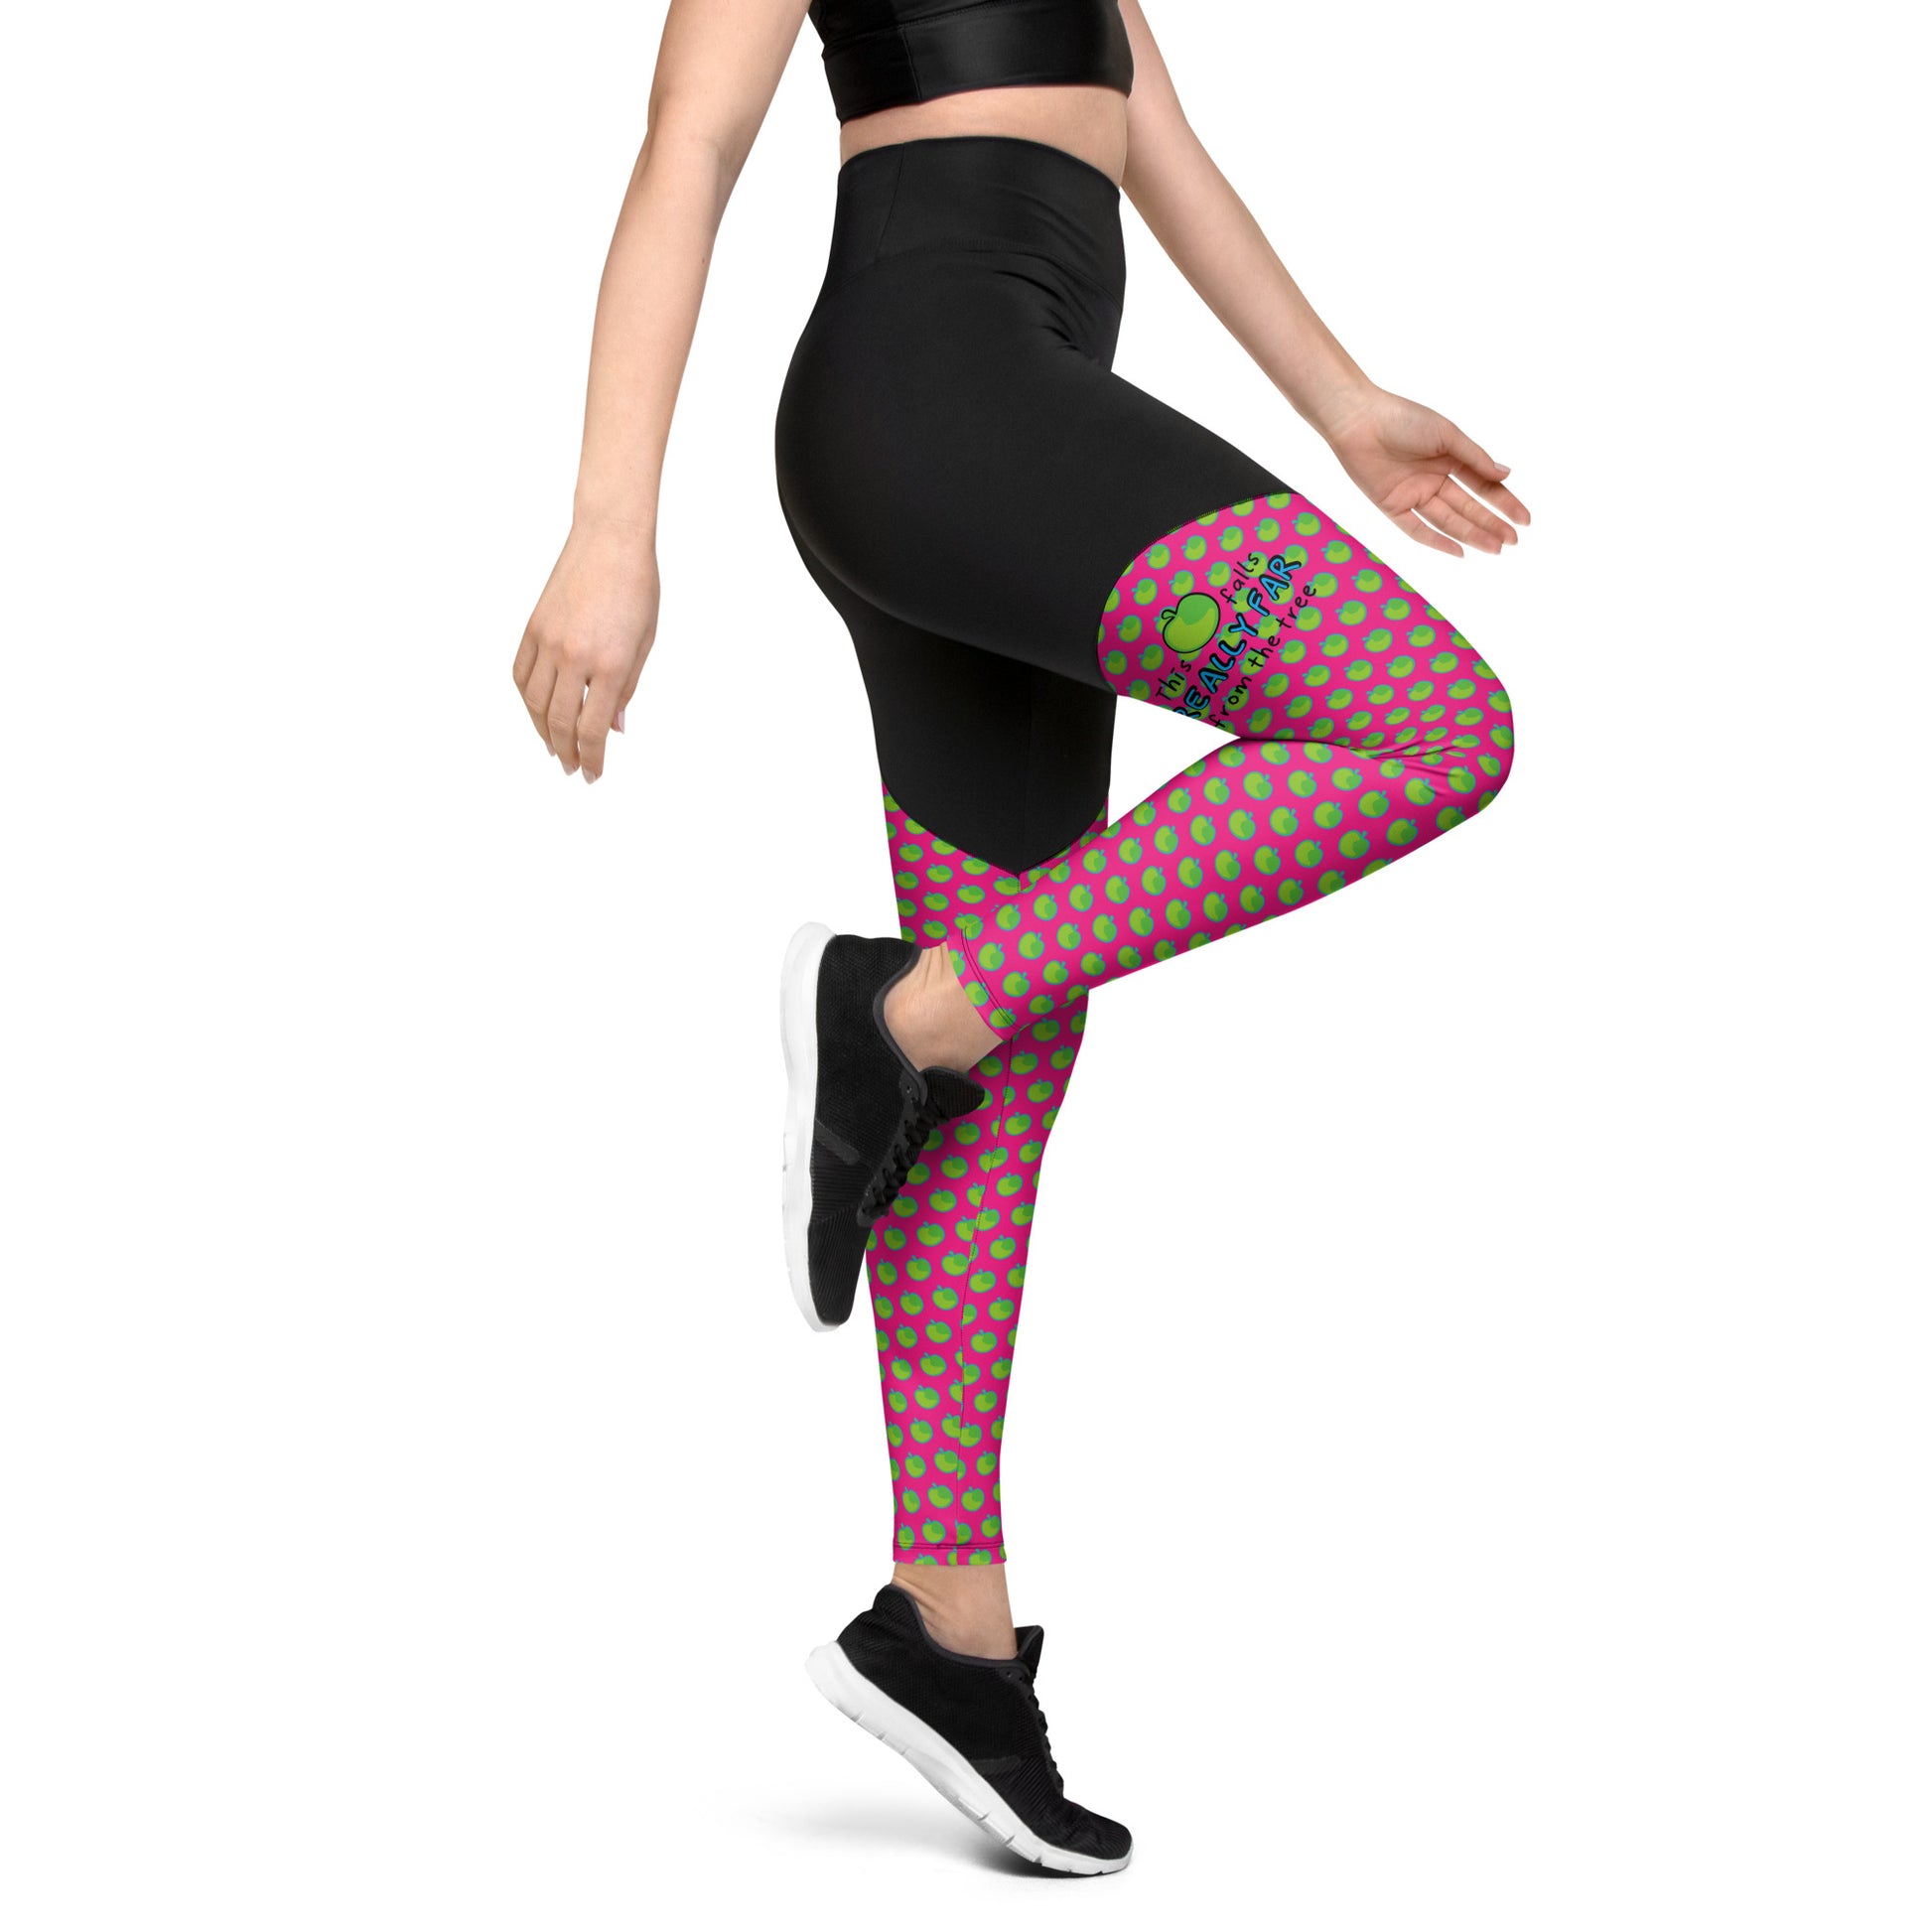 Tights for girls get funky